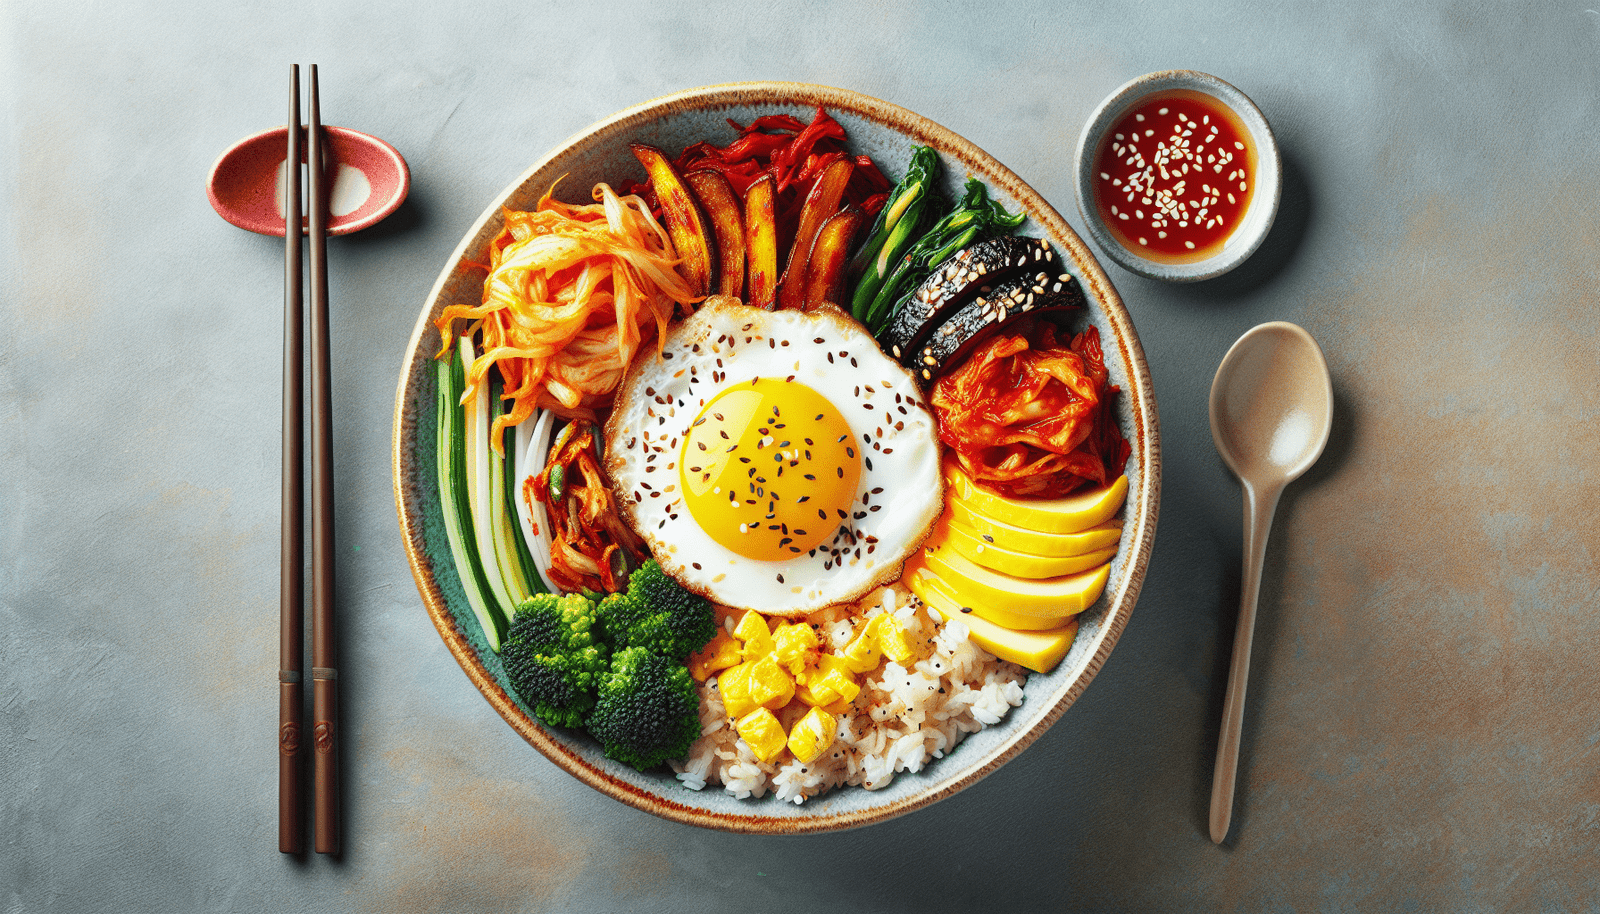 Can You Recommend Trending Recipes For Korean-inspired Breakfast Bowls?